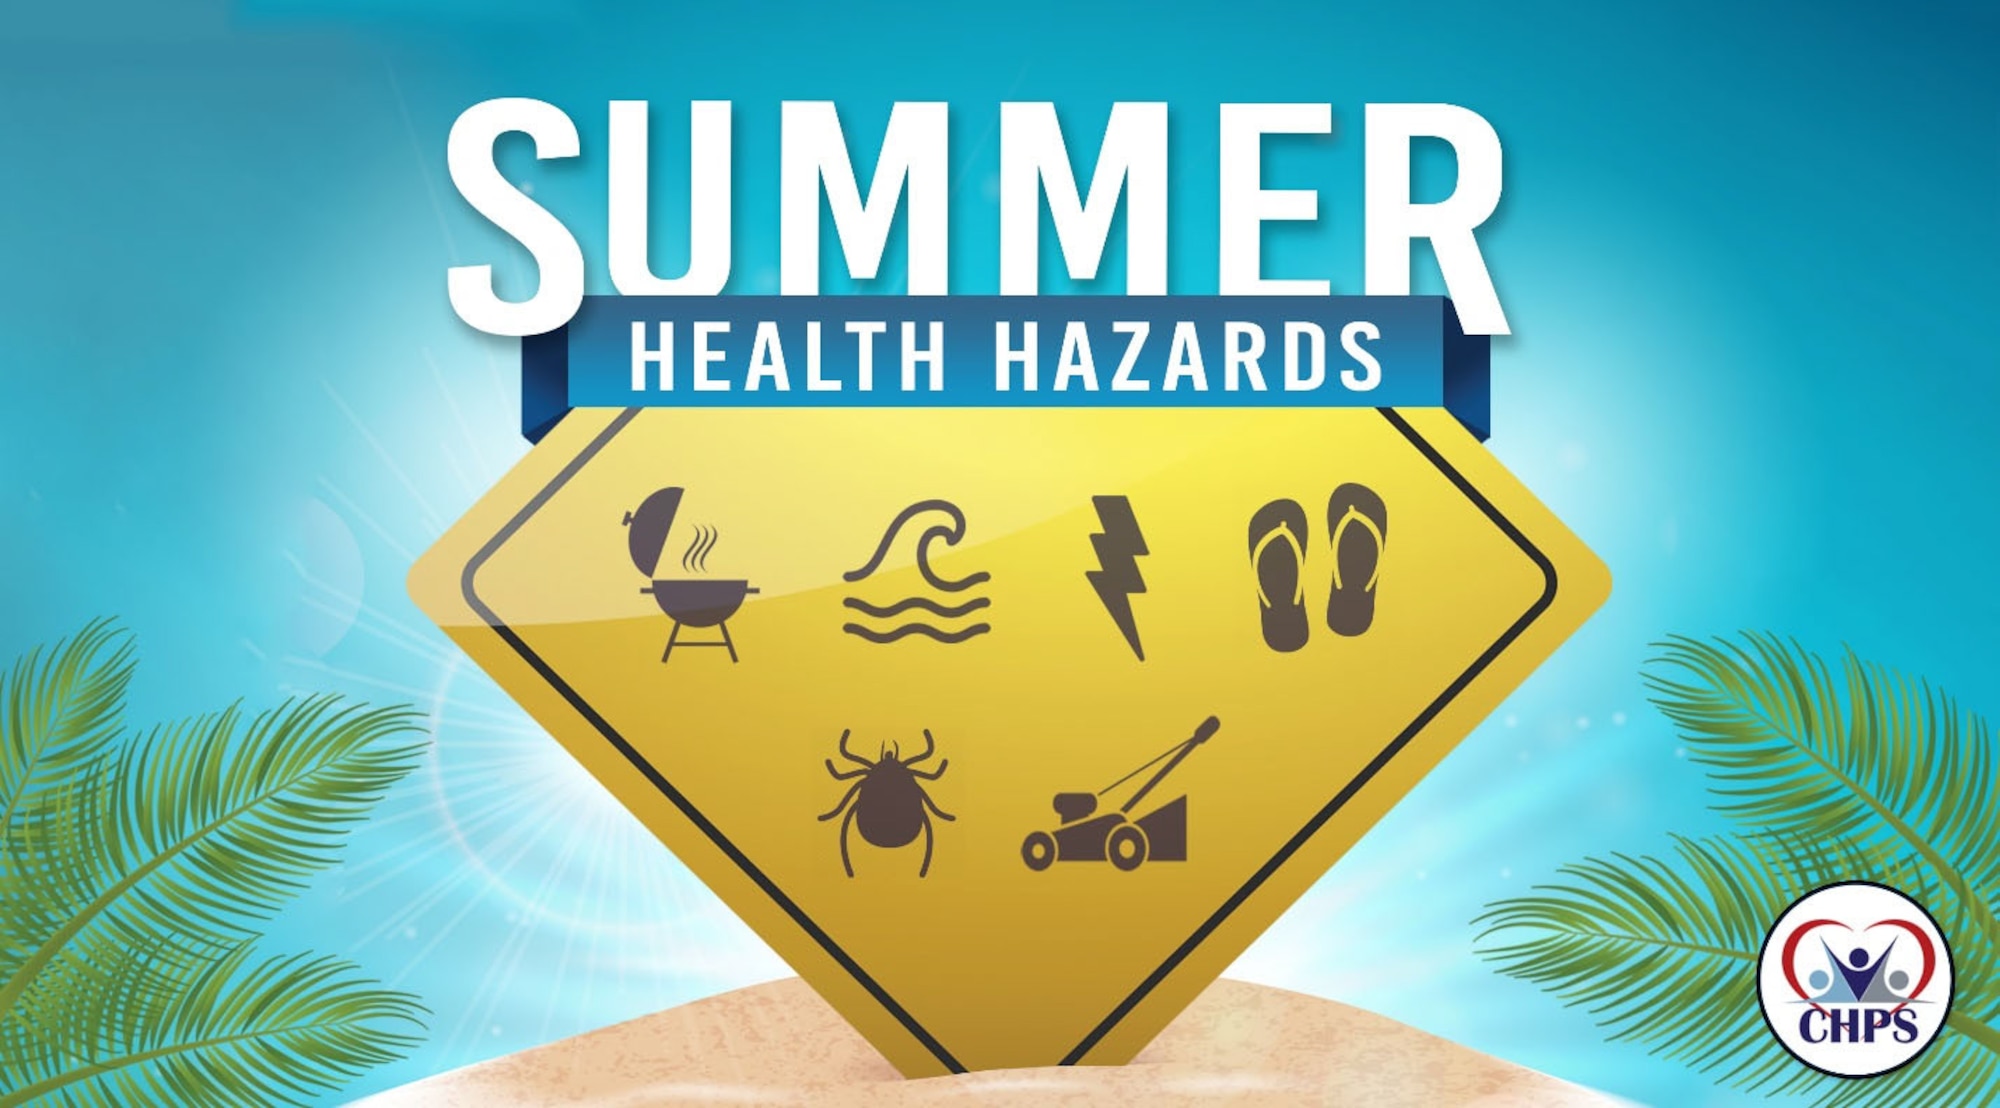 Summer’s here, and with it comes backyard barbecues, days at the beach, and time spent outdoors. Some of the things that make summer so much fun – swimming, hiking, and longer days, also present plenty of health risks. Don’t let a health emergency ruin your activities.